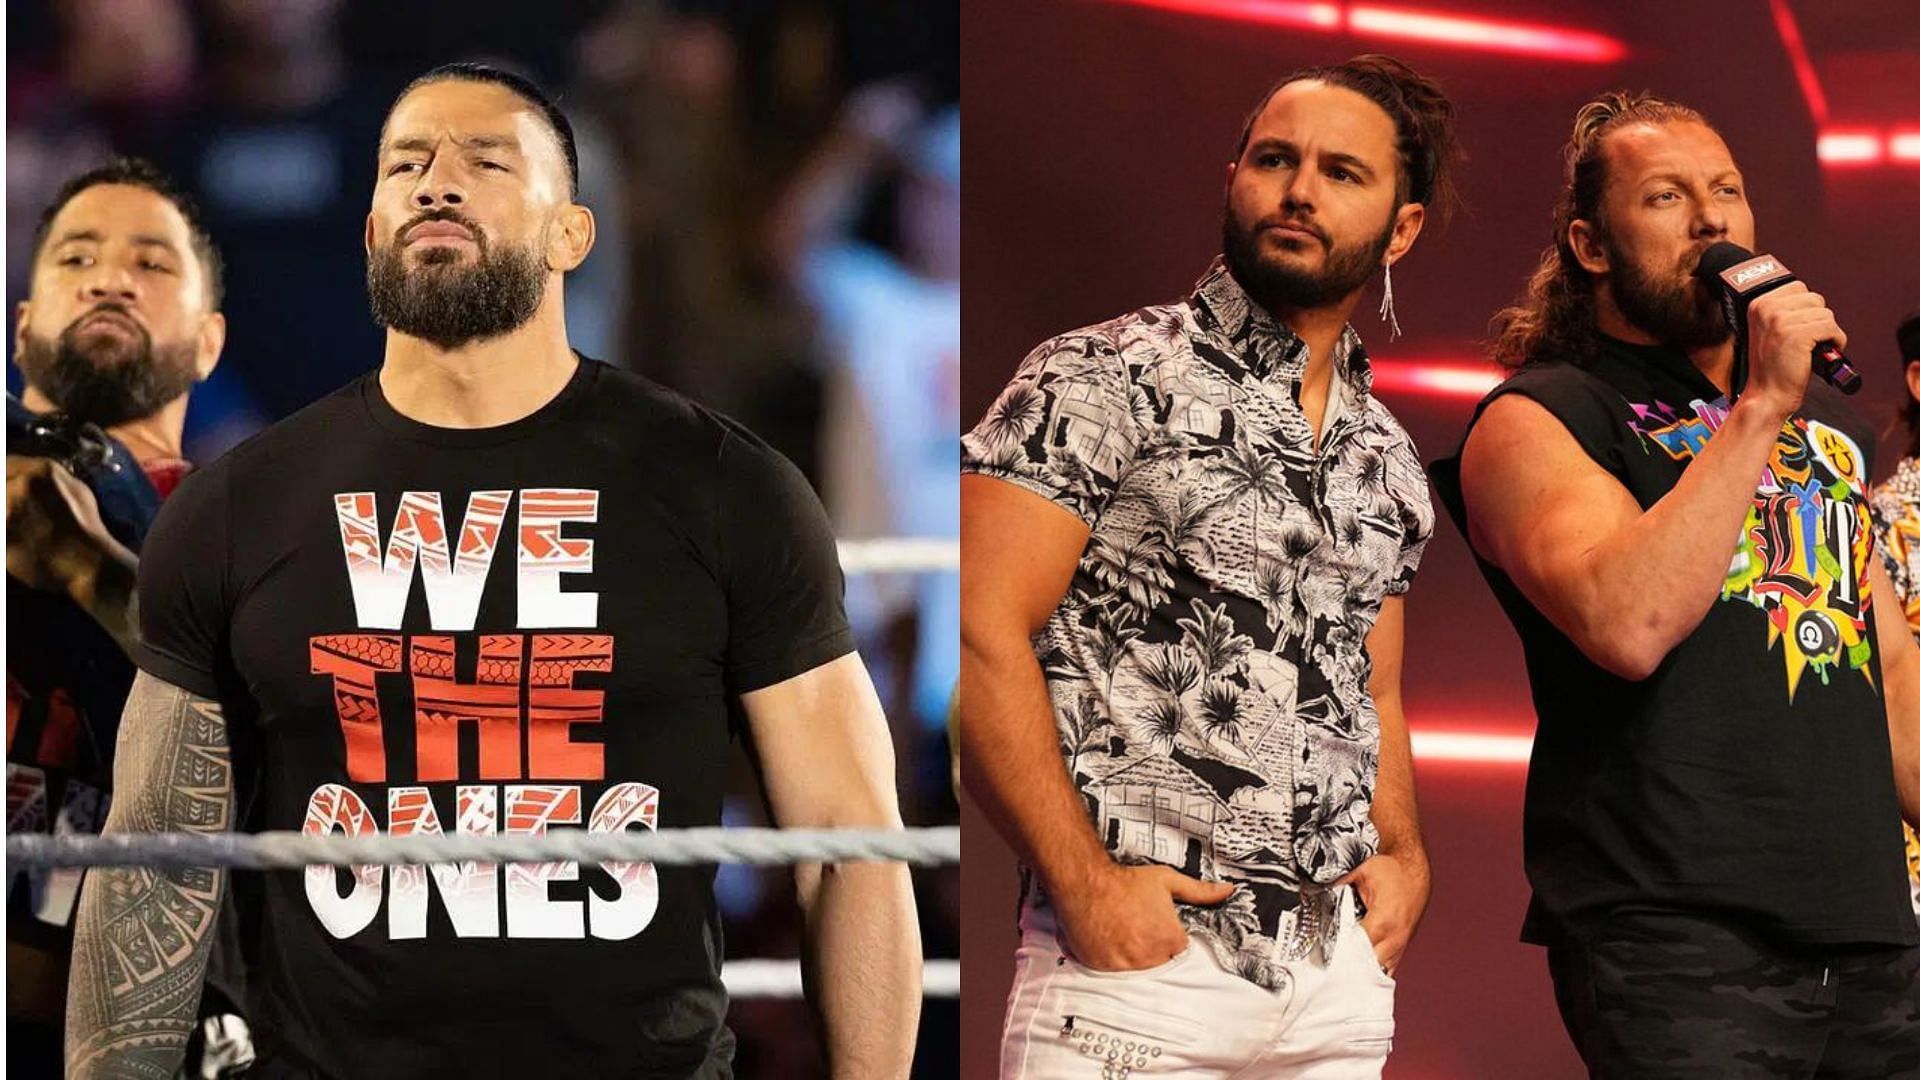 The Bloodline and The Elite are two top factions in WWE &amp; AEW respectively